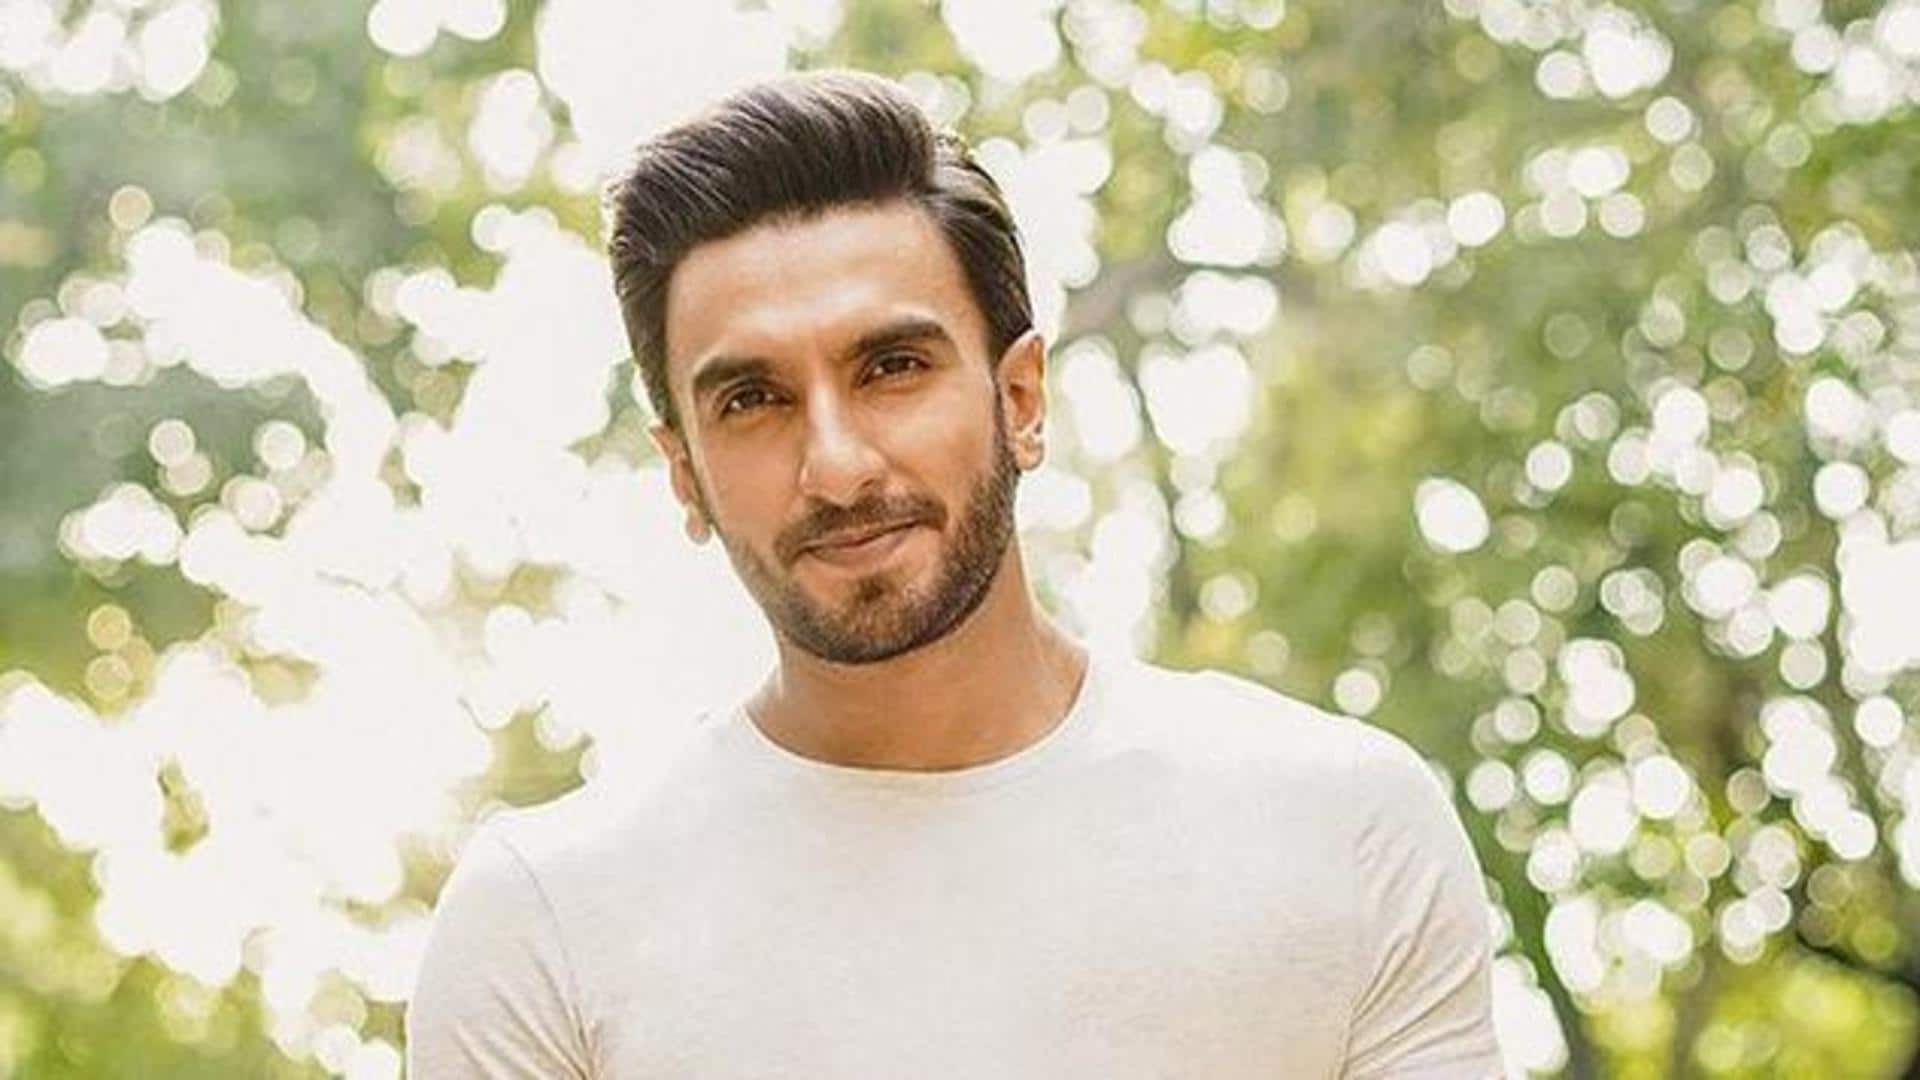 Ranveer Singh to endorse Nutella in India; exciting campaign ahead